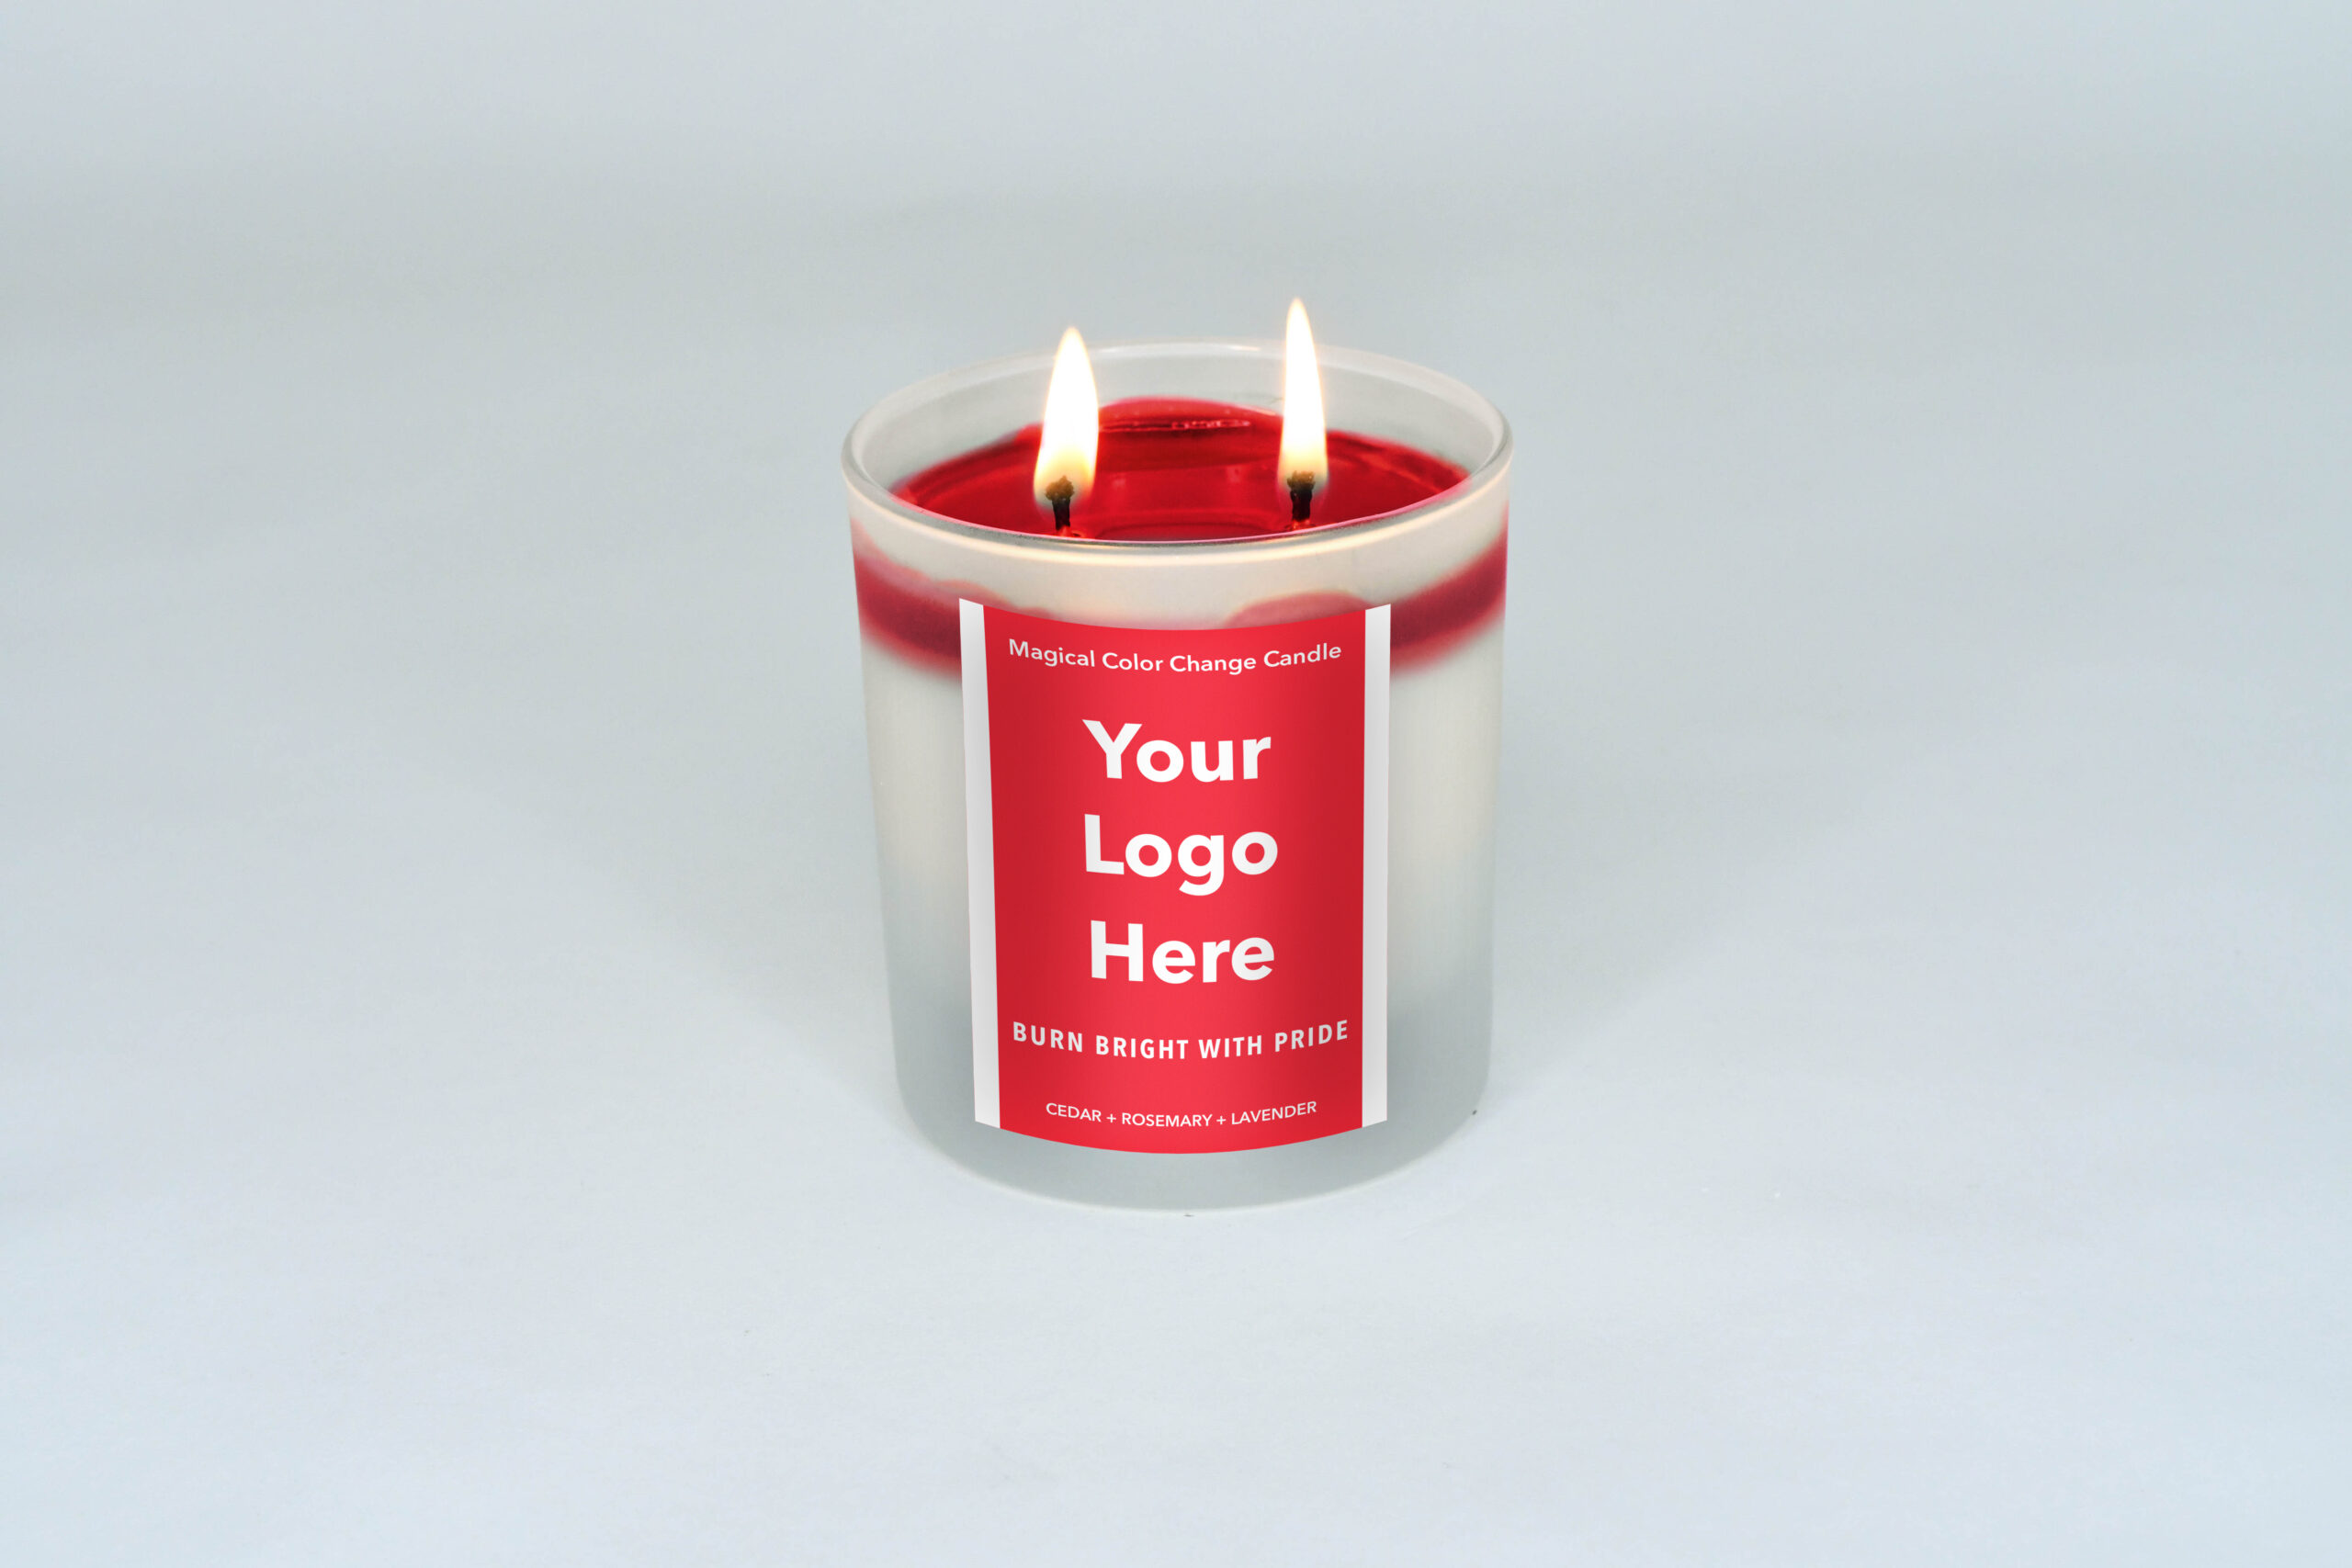 Red candle, your logo here, lit, full wax pool